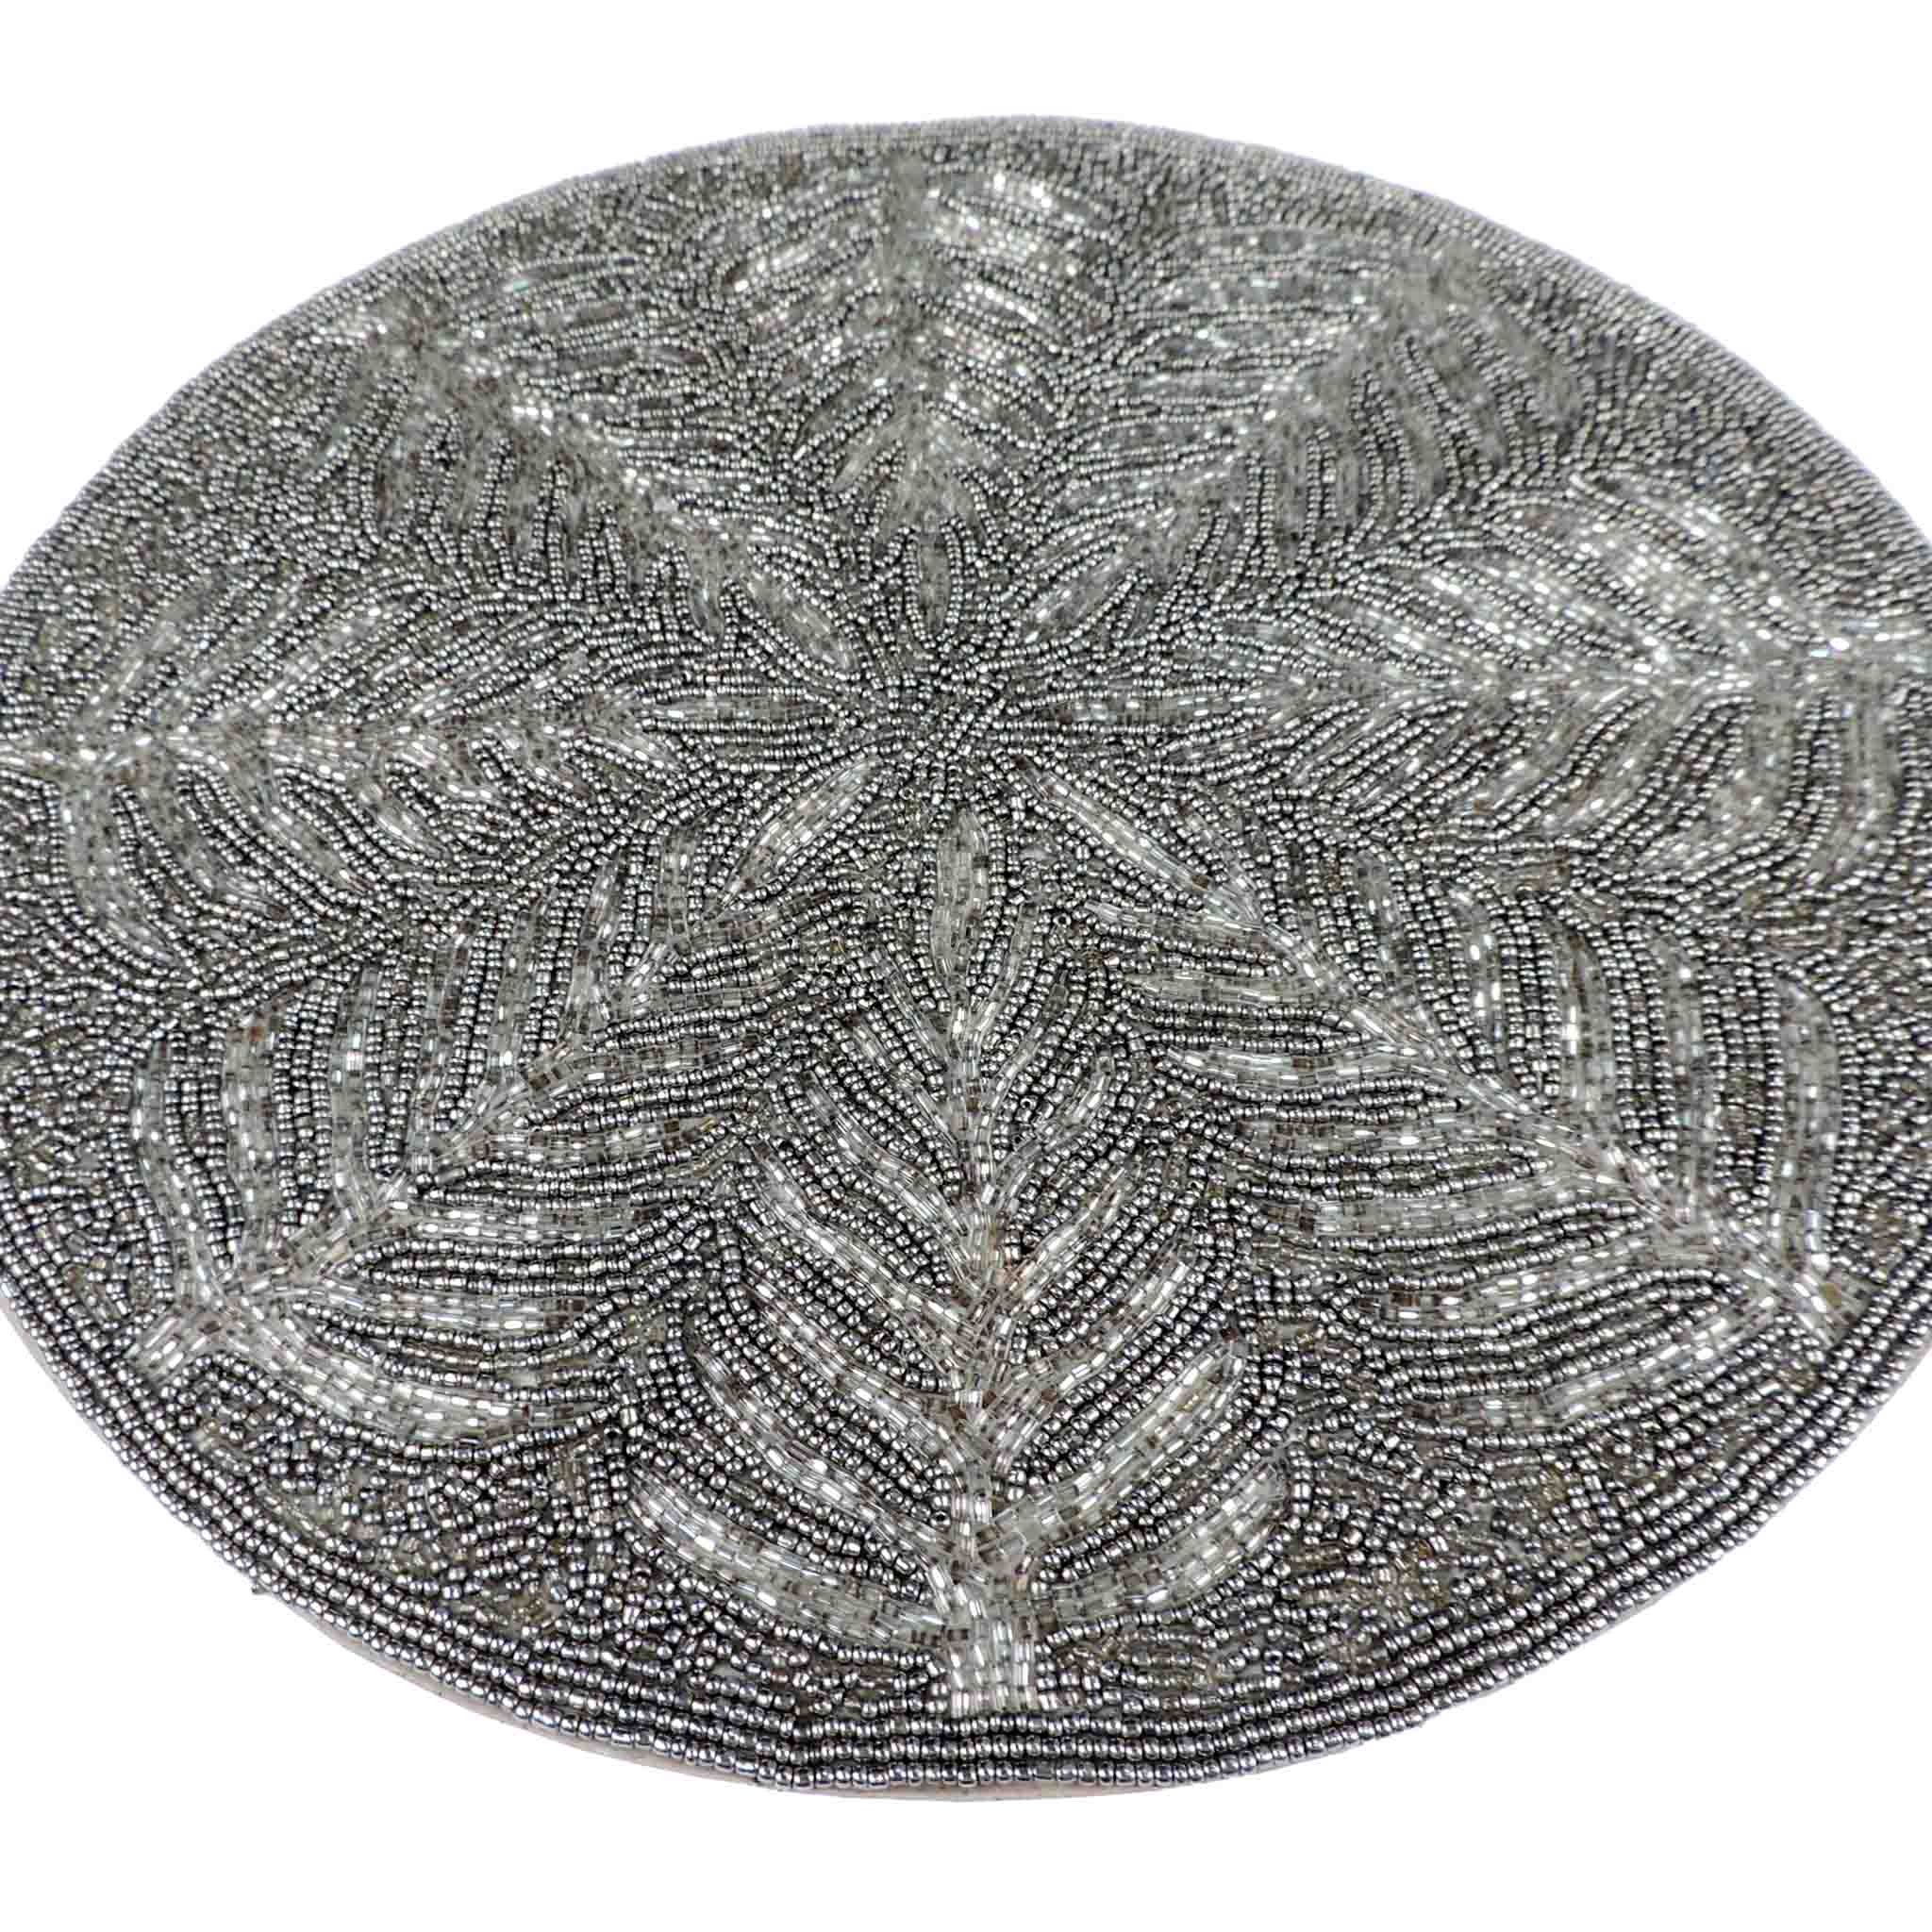 Tree of Life Glass Bead Embroidered Placemat in Smoke & Silver, Set of 2/4